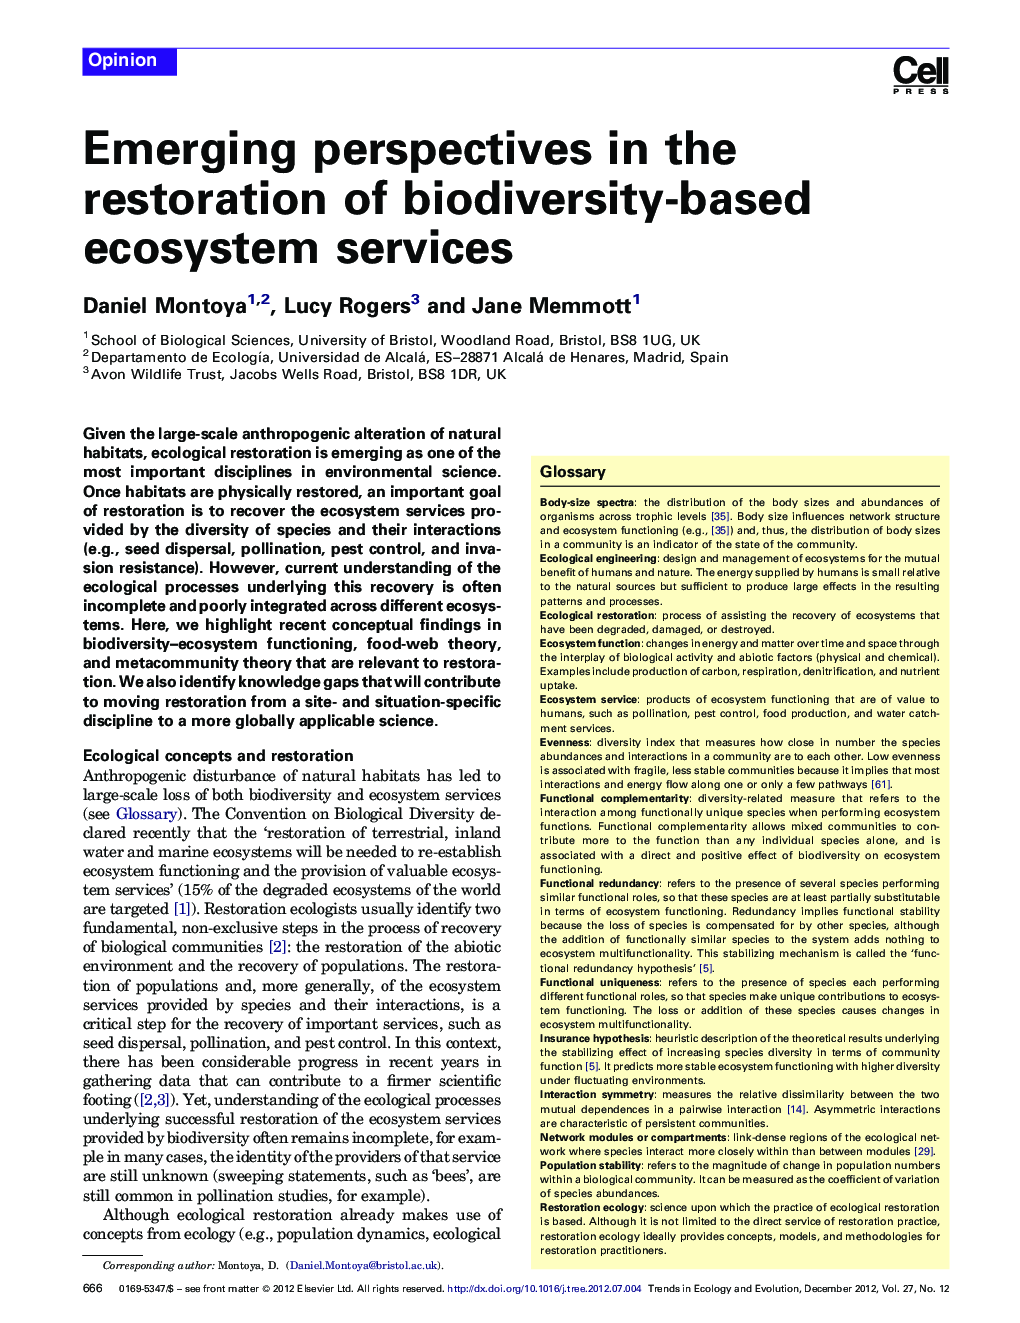 Emerging perspectives in the restoration of biodiversity-based ecosystem services